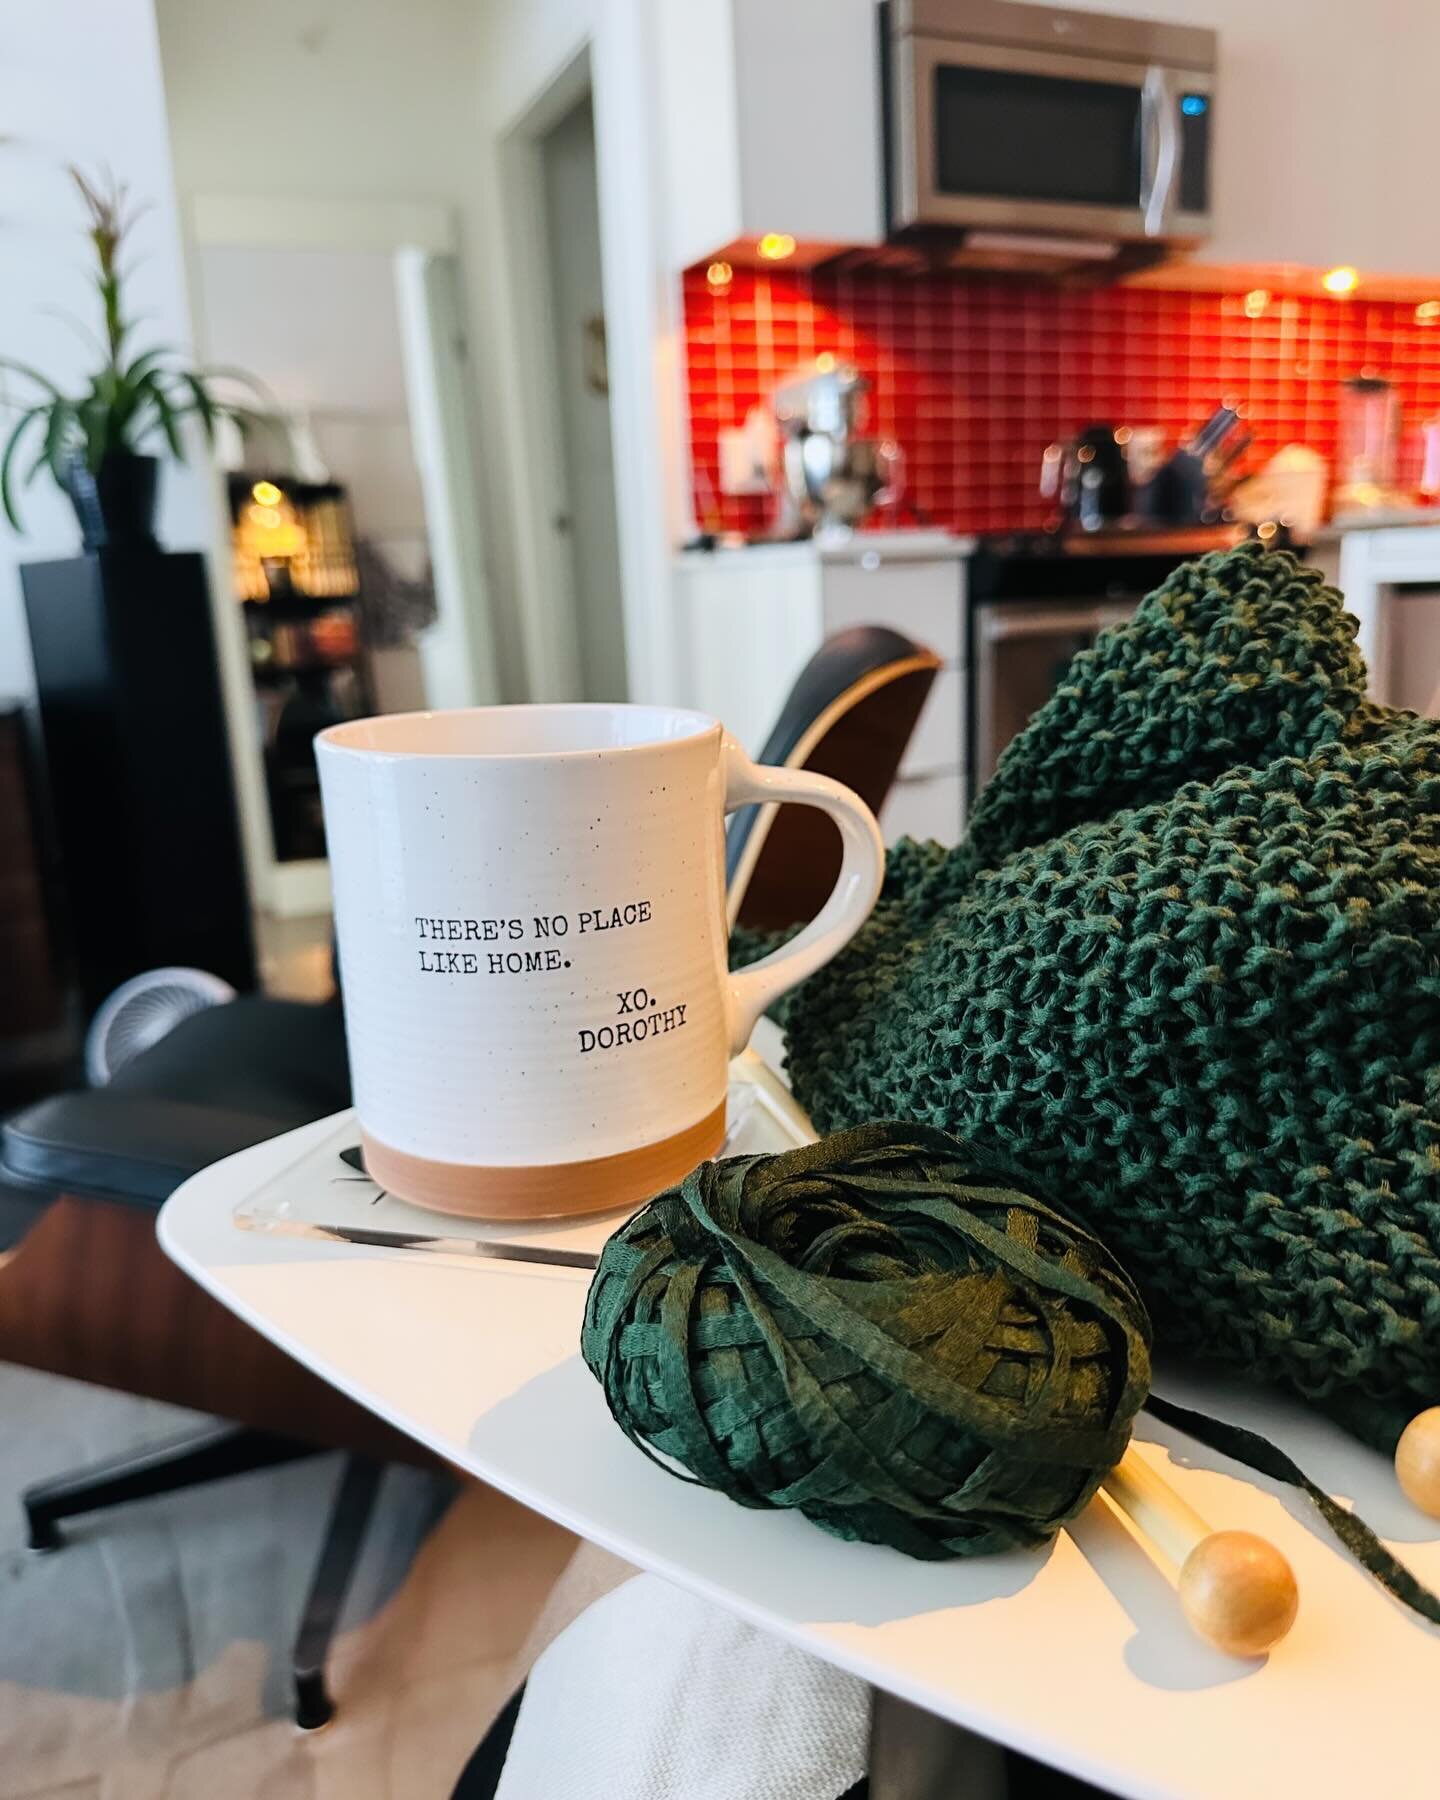 Happy St. Patrick&rsquo;s Day! 🍀💚 Keeping in the spirit of the season, I&rsquo;m three quarters of the way to completing a light weight @woolandthegang Love Thing jumper in Tina Tape tencil yarn in fern green. If it works out, I will make another i